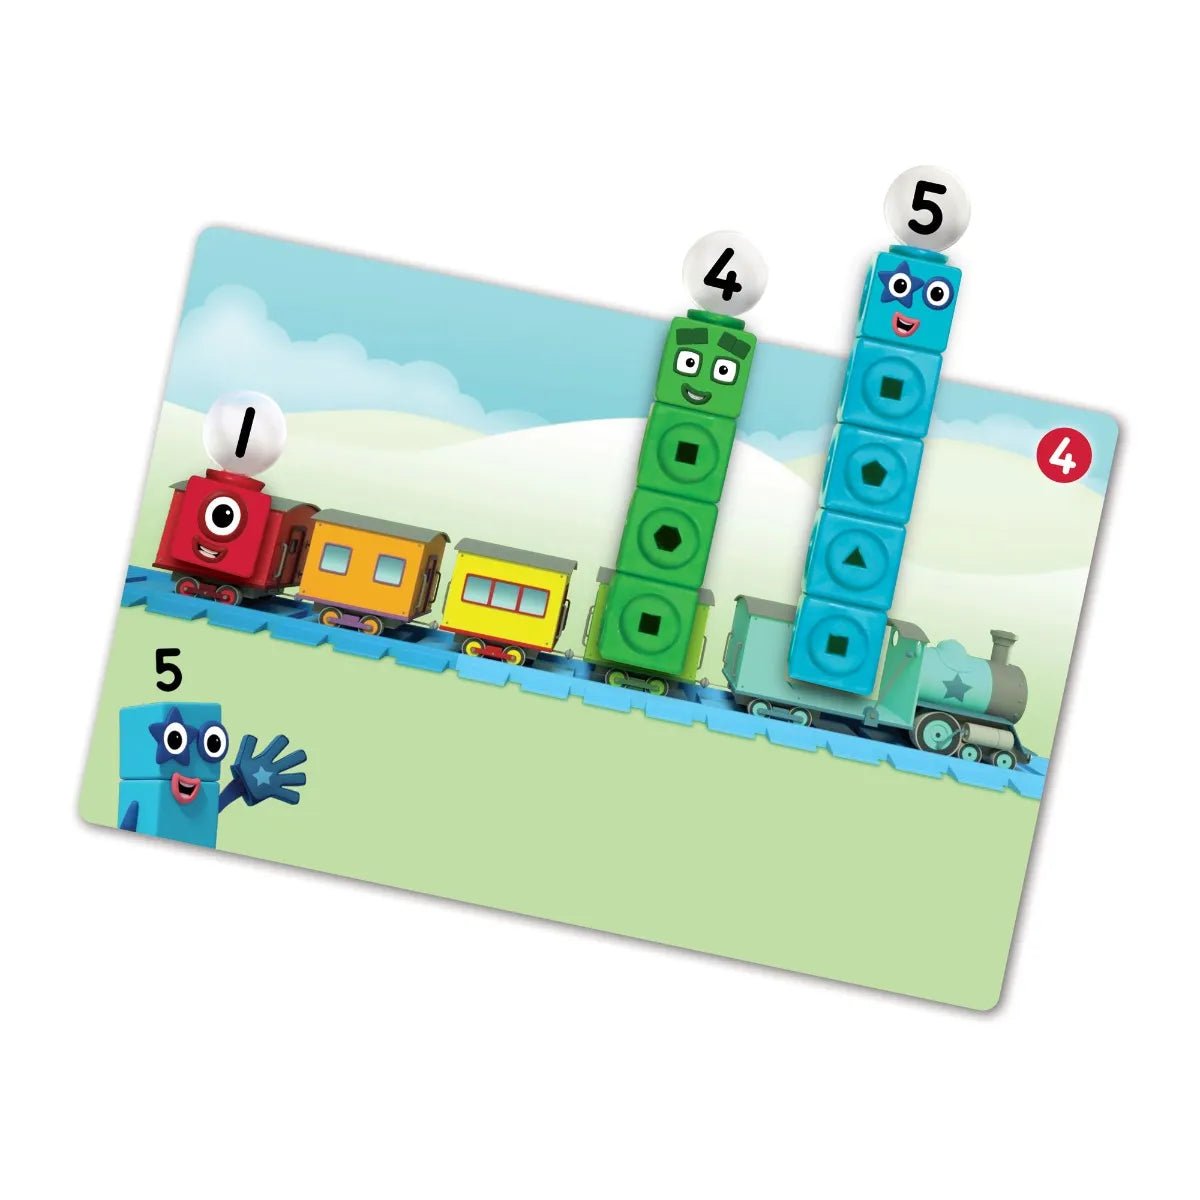 Learning Resources - Mathlink Cubes NumberBlocks 1-10 - Playlaan